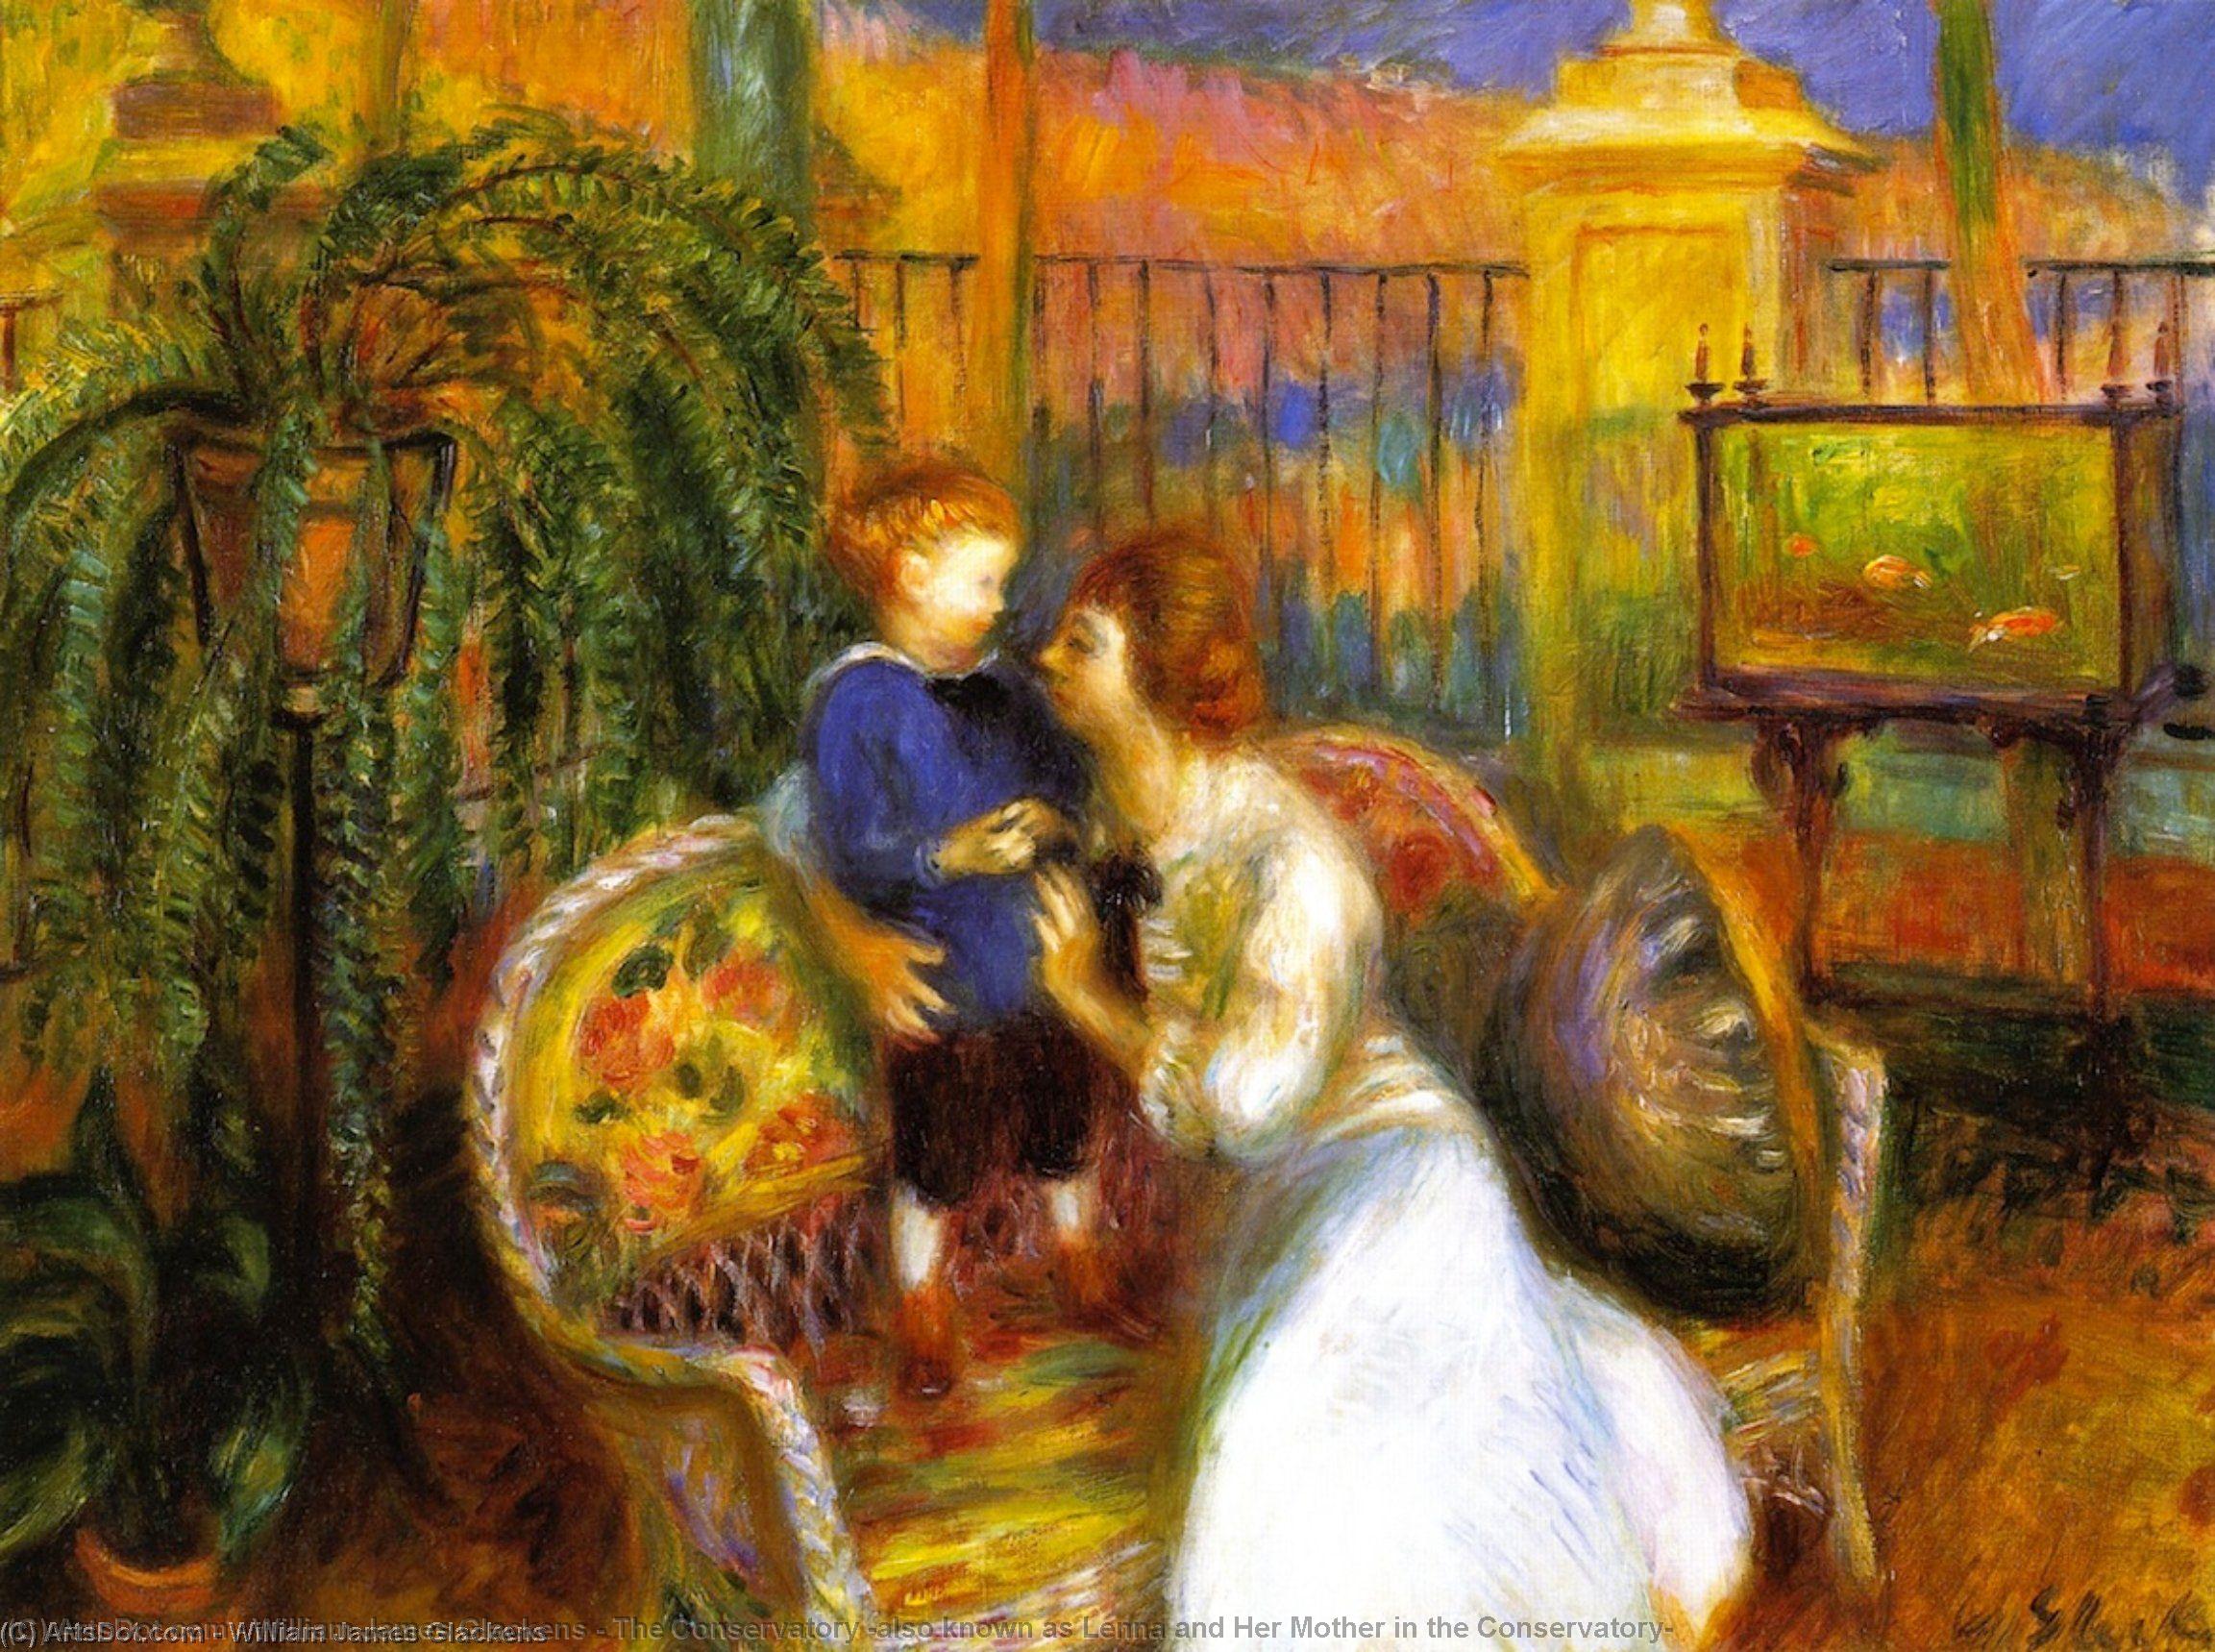 WikiOO.org - 백과 사전 - 회화, 삽화 William James Glackens - The Conservatory (also known as Lenna and Her Mother in the Conservatory)